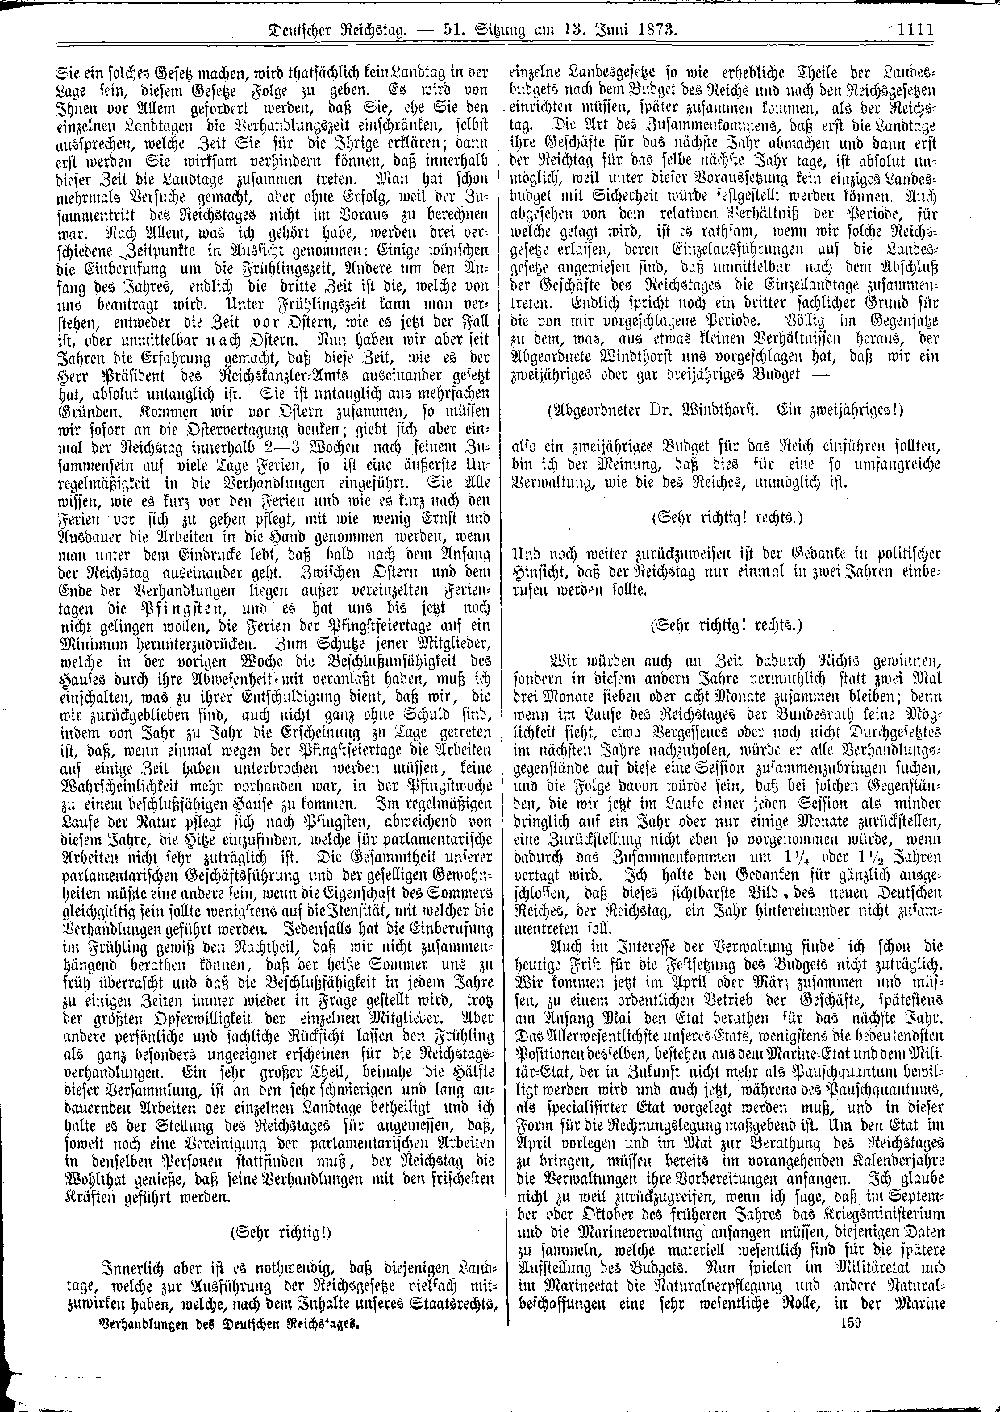 Scan of page 1111